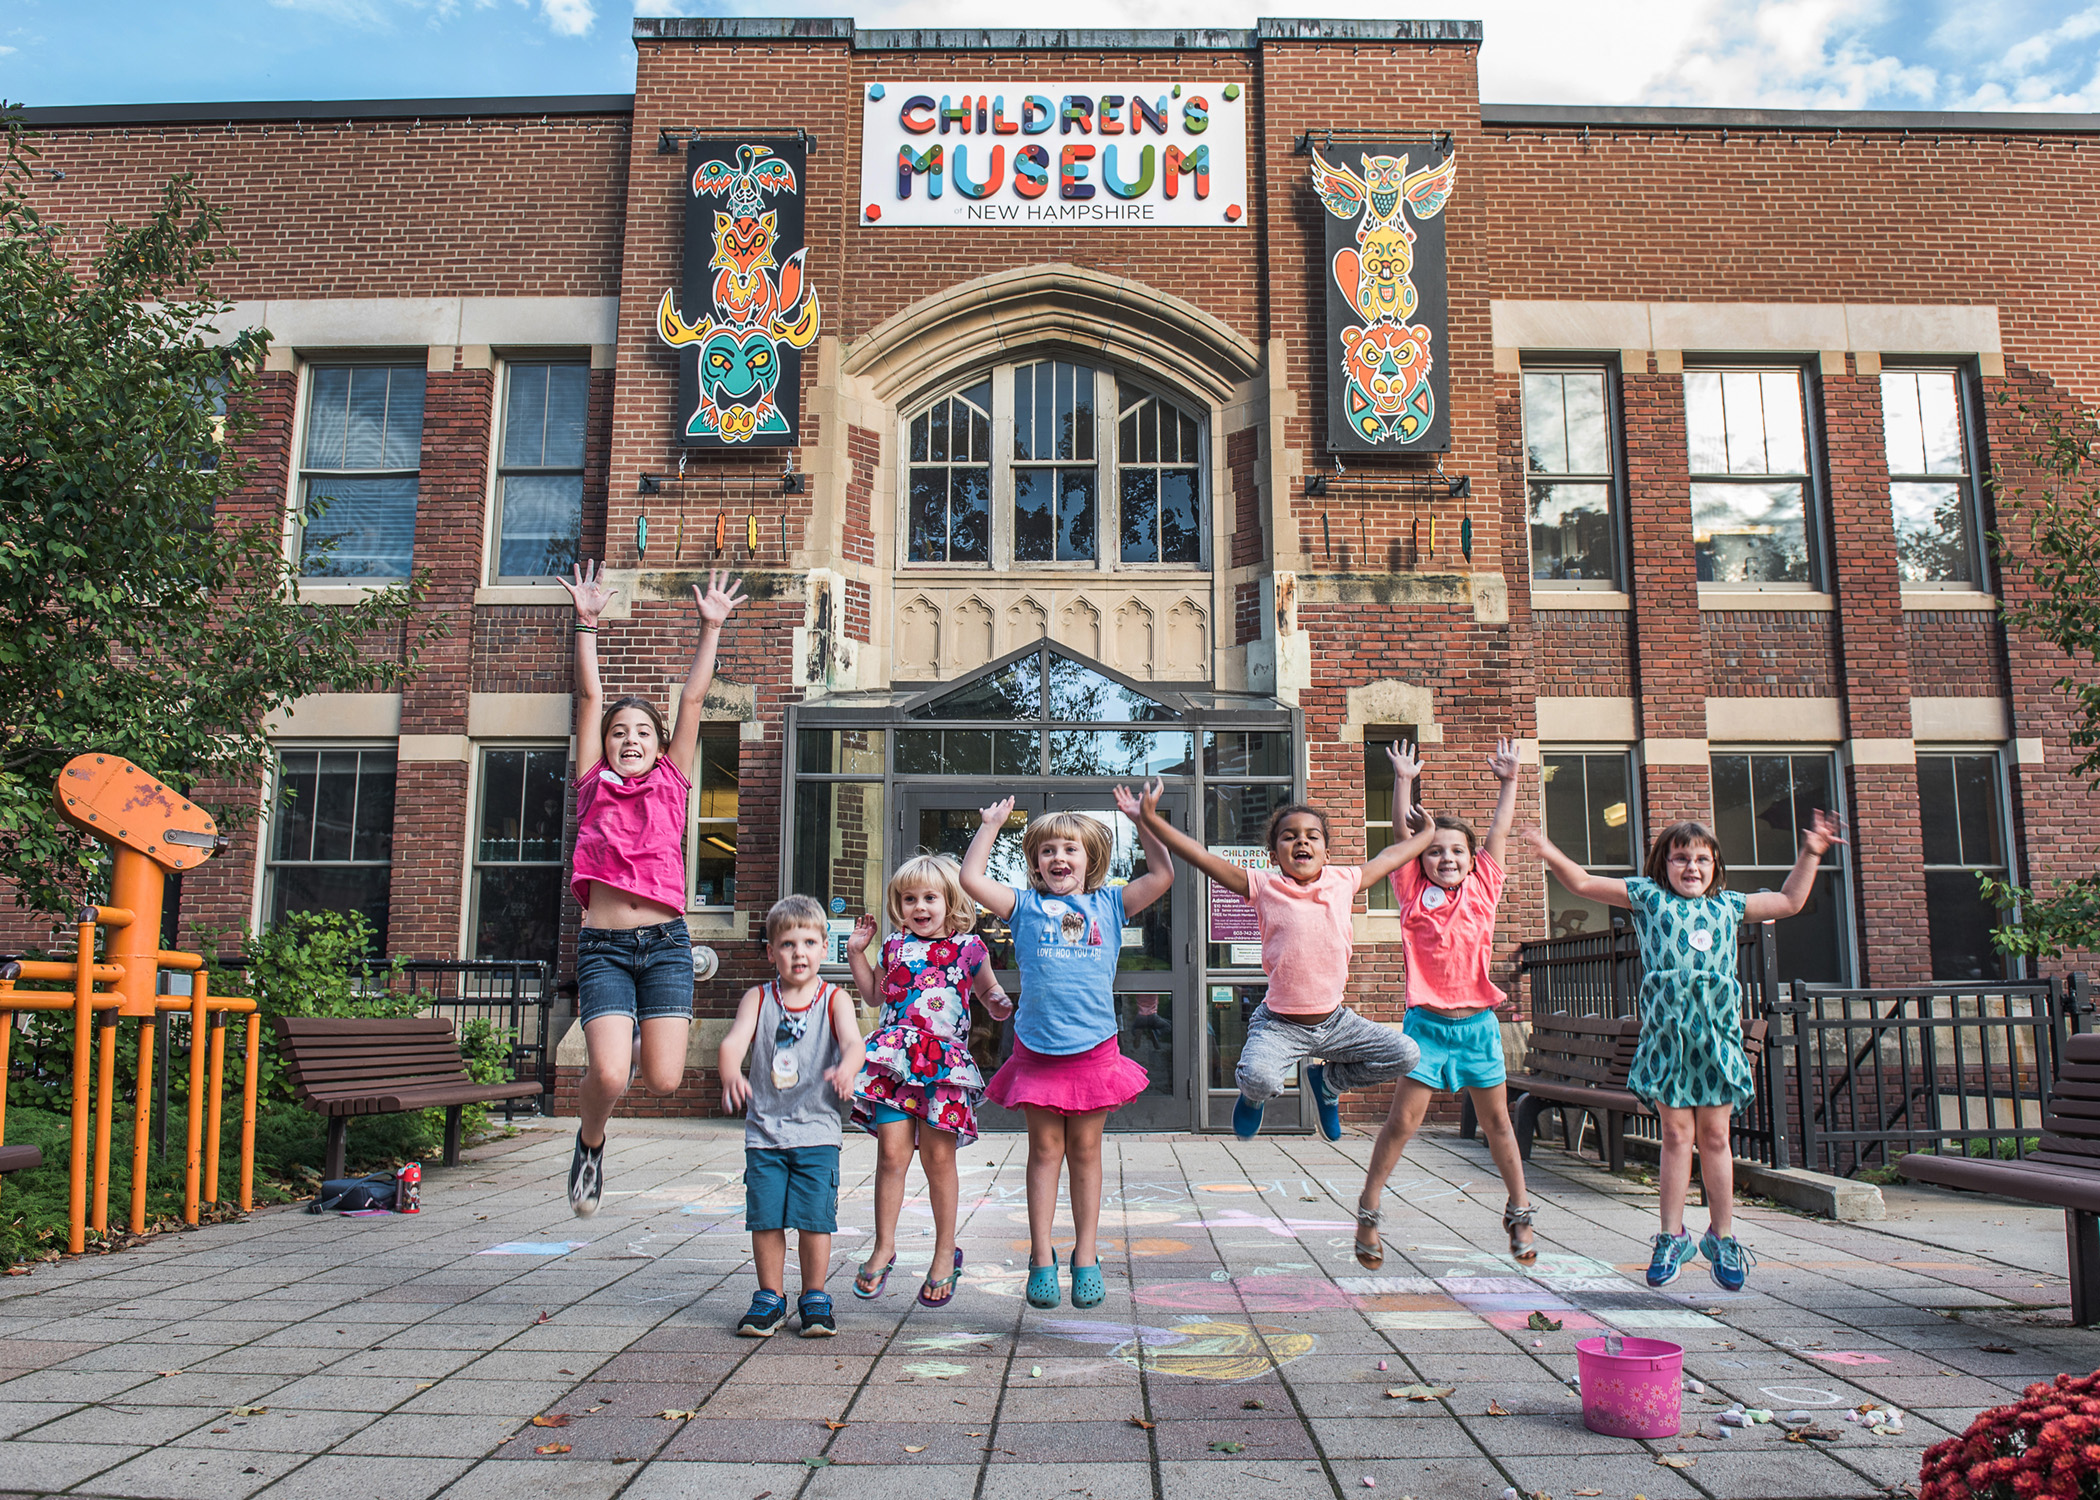 A visit to the Children's Museum of New Hampshire in Dover is worth celebrating! Photo courtesy of Taraphotography.com